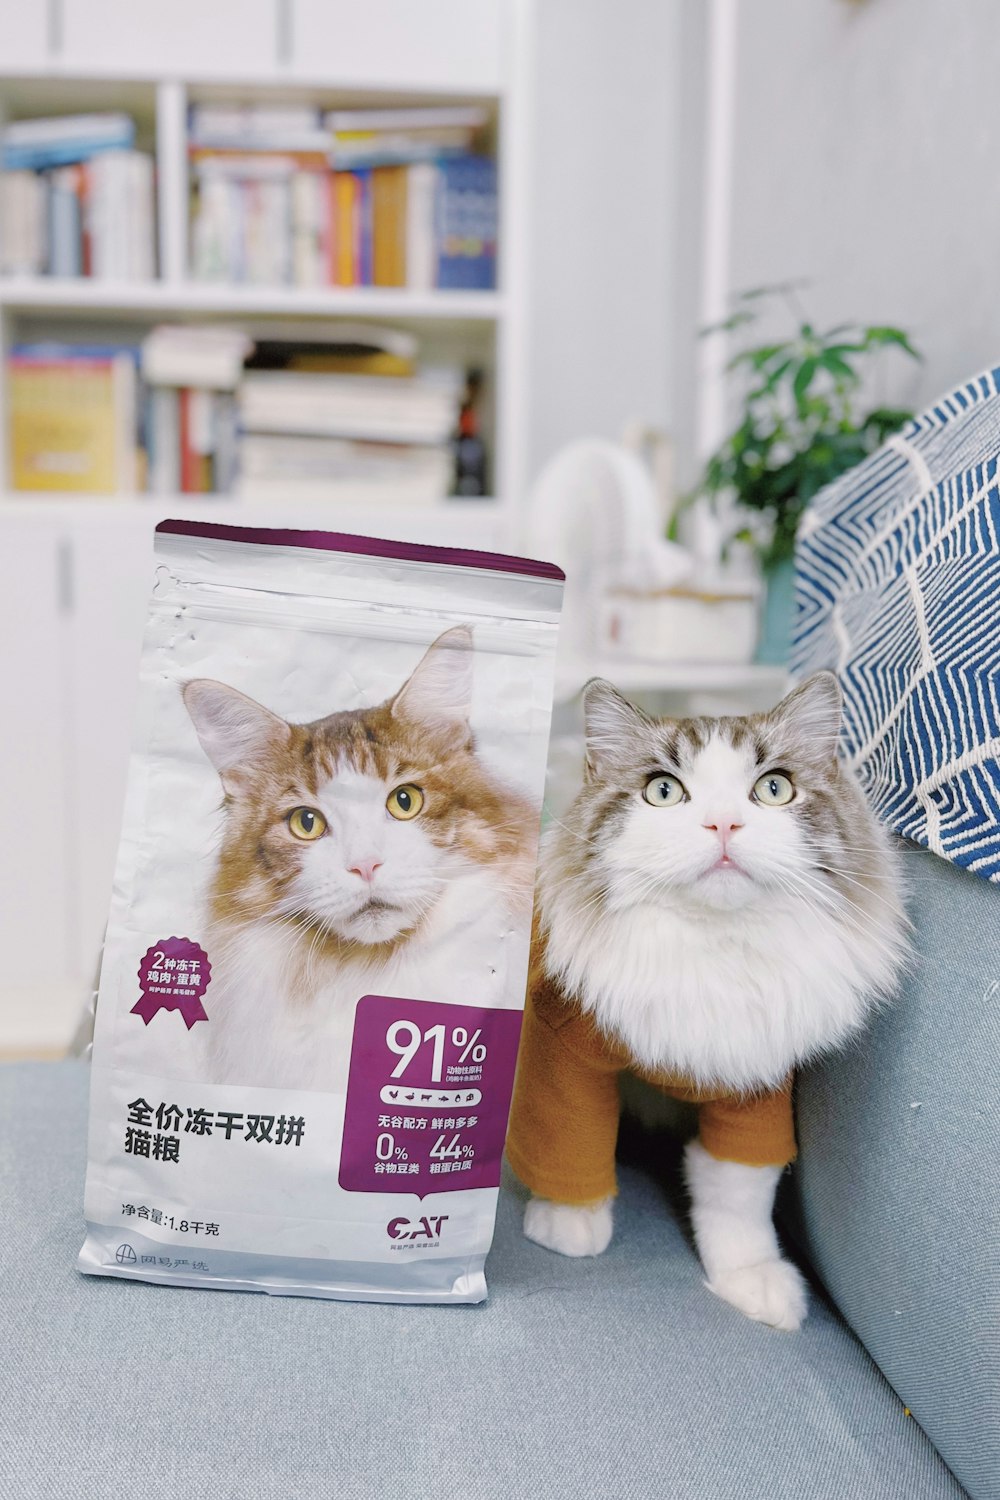 a cat sitting on a couch next to a bag of cat food